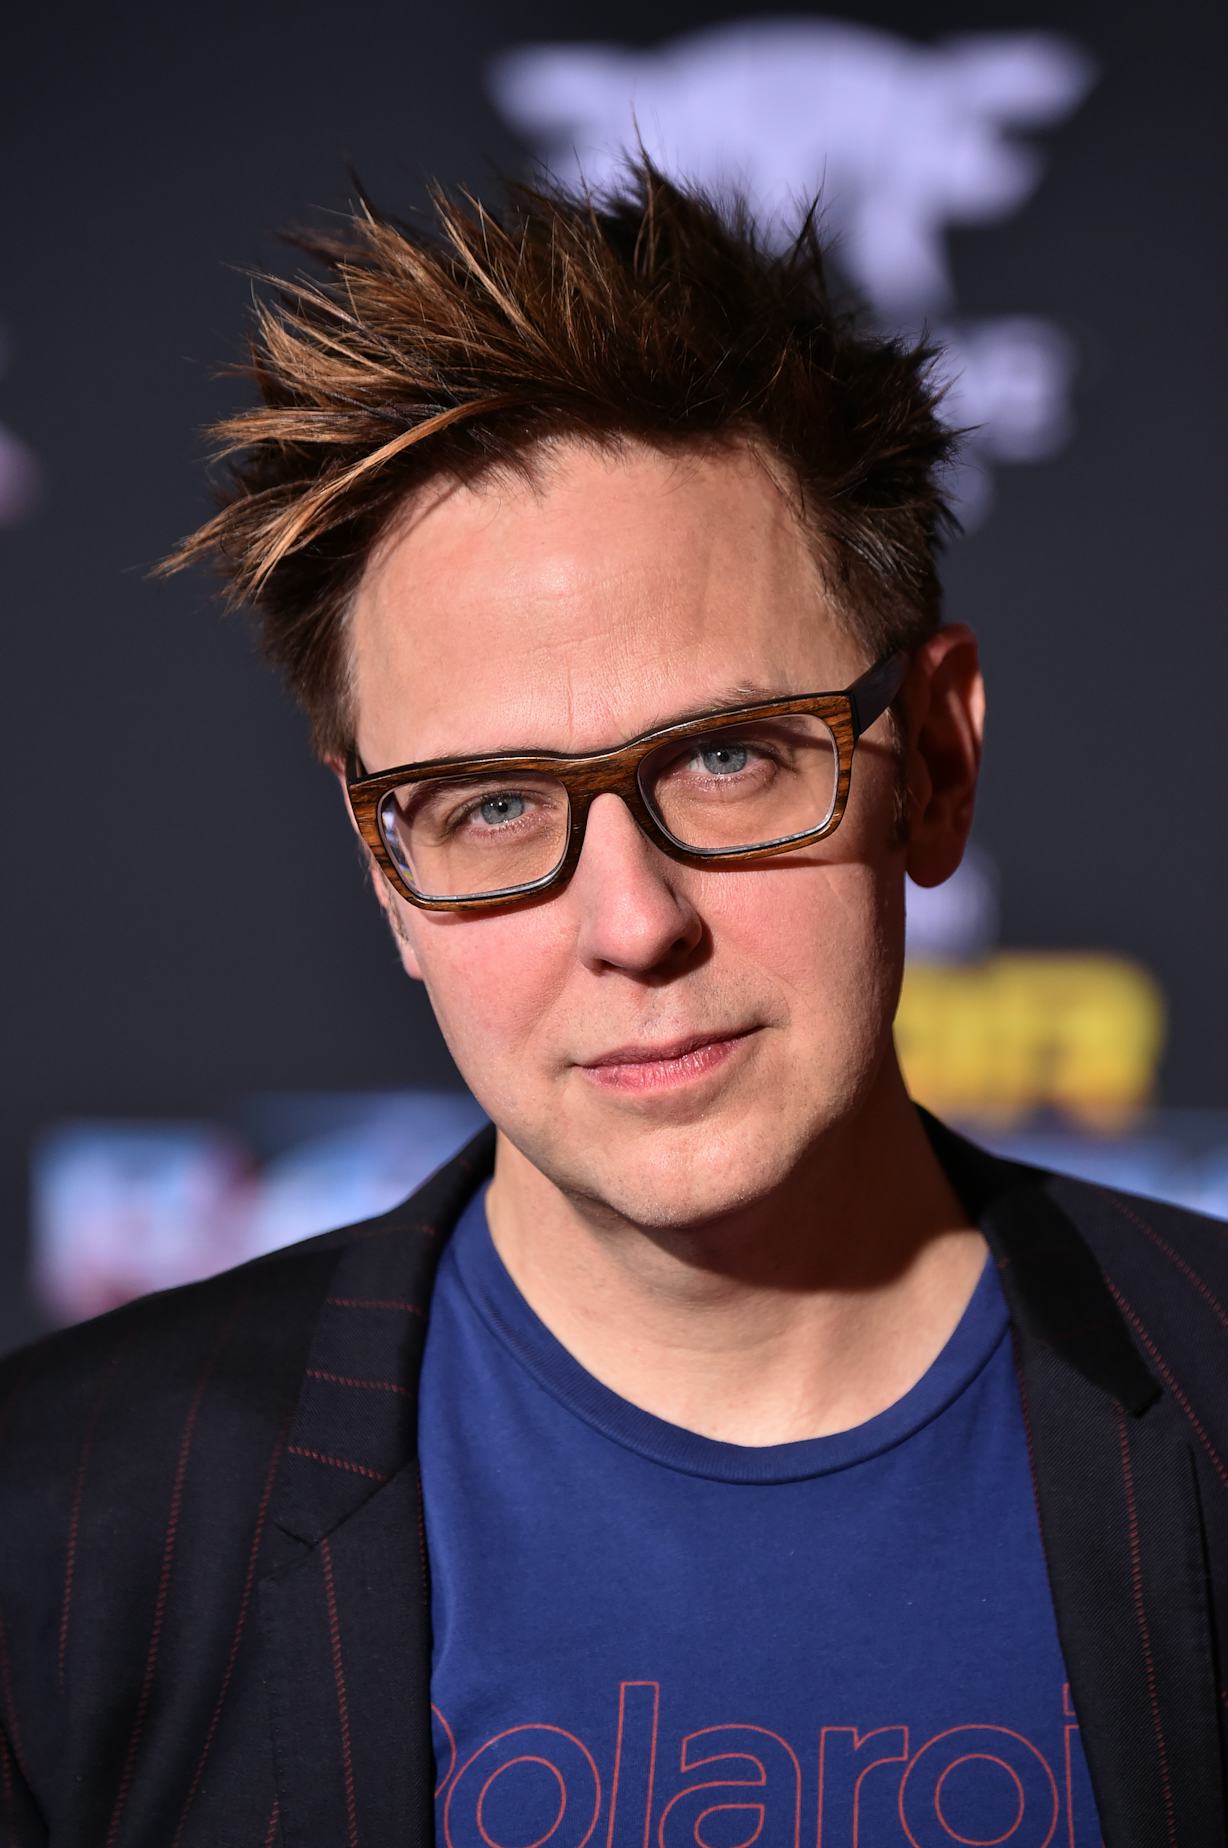 james-gunn-has-been-fired-from-guardians-of-the-galaxy-vol-3-after